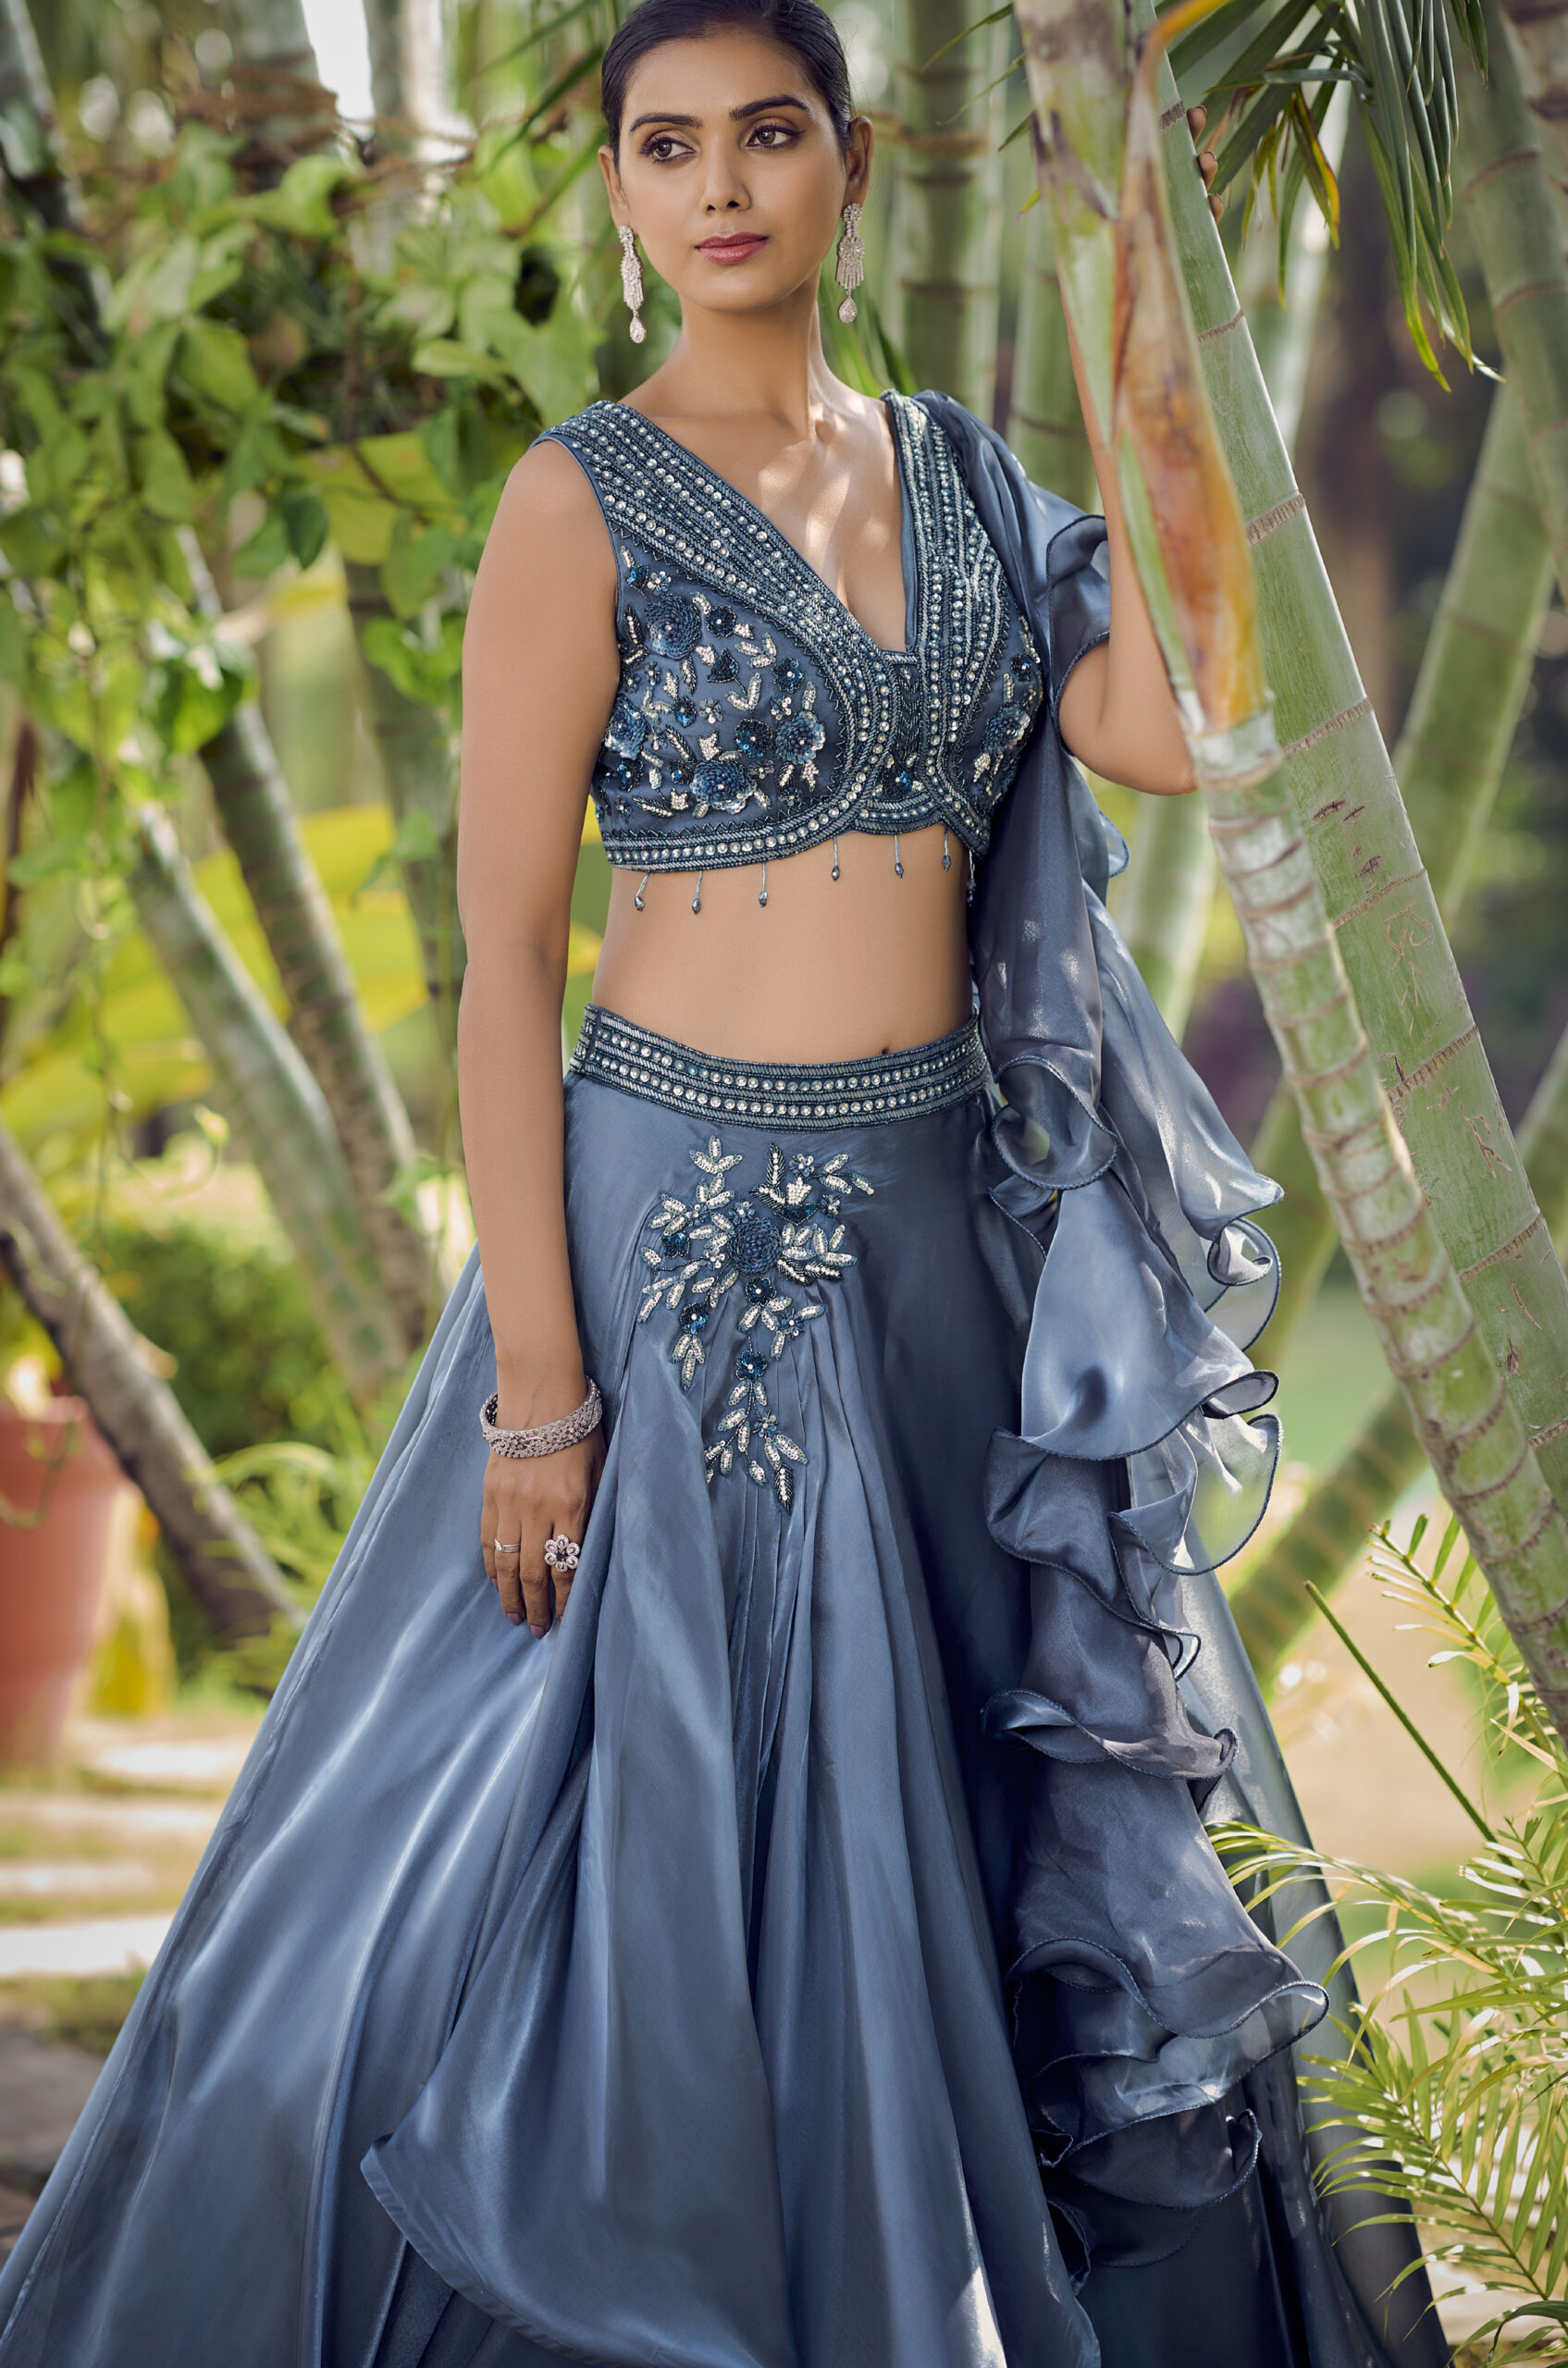 Top 6 Cool Lehenga Choli Designs To Make A Statement At Your Best Friend's  Wedding | Readiprint Fashions Blog